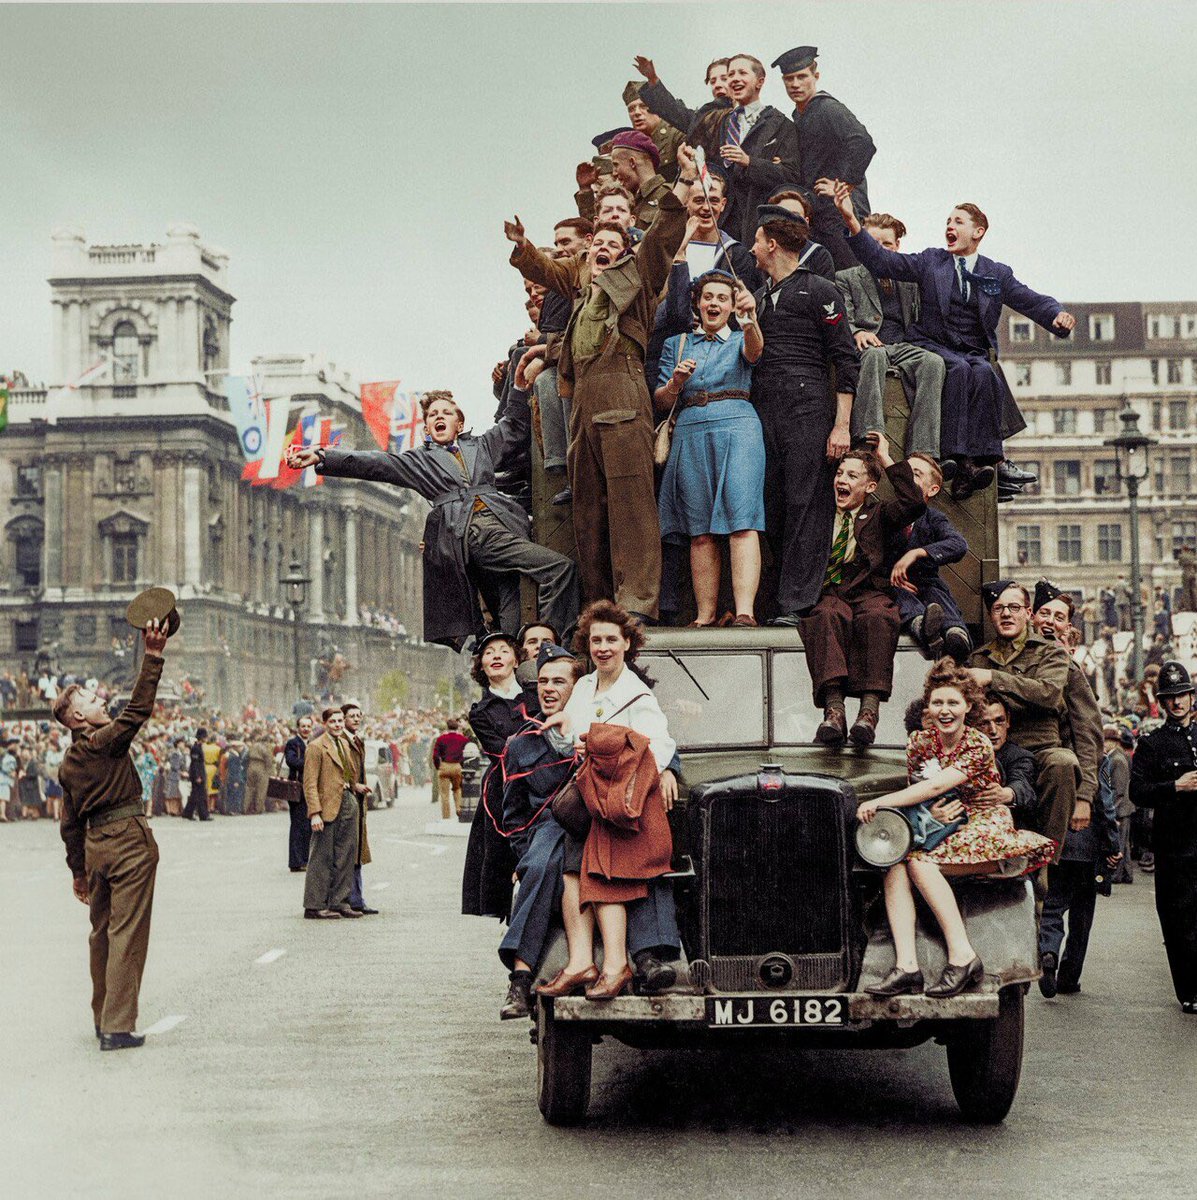 Parliament Square, 1945. VE Day marks the historic moment that Germany signed an unconditional surrender, ending the Second World War in Europe on 7th May 1945. A day later, celebrations broke out throughout the capital. Stunning colourisation by @jordanacostahq